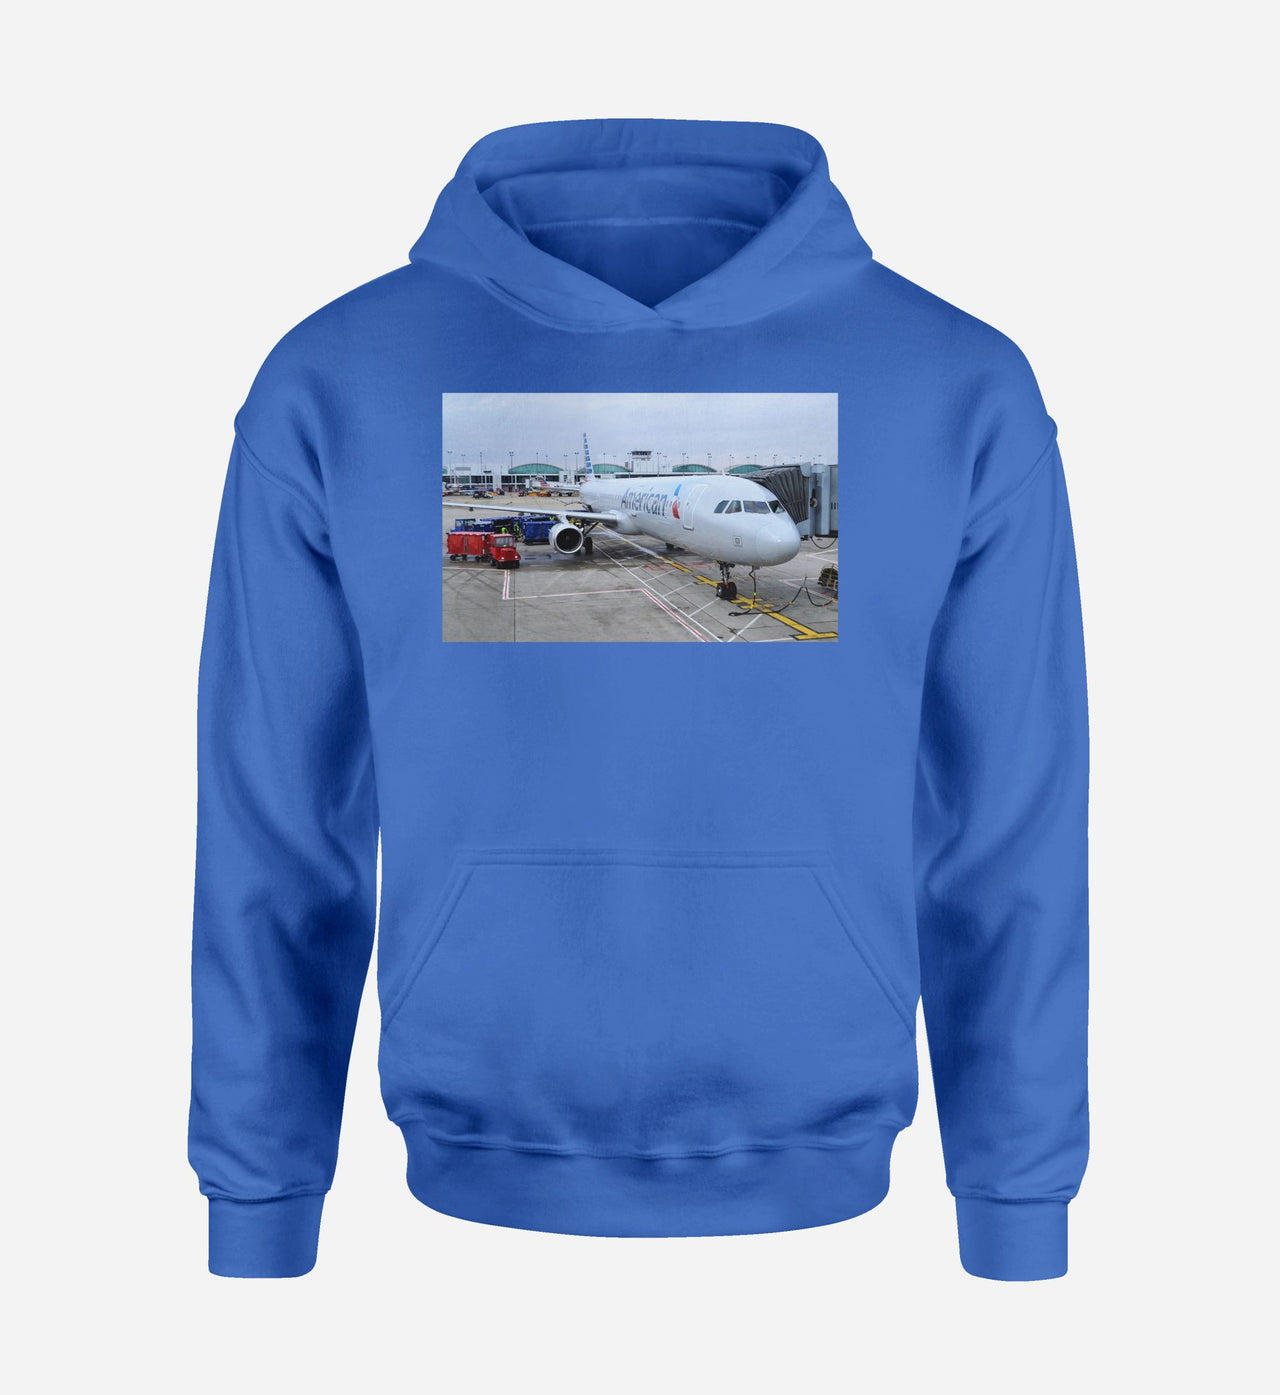 American Airlines A321 Designed Hoodies